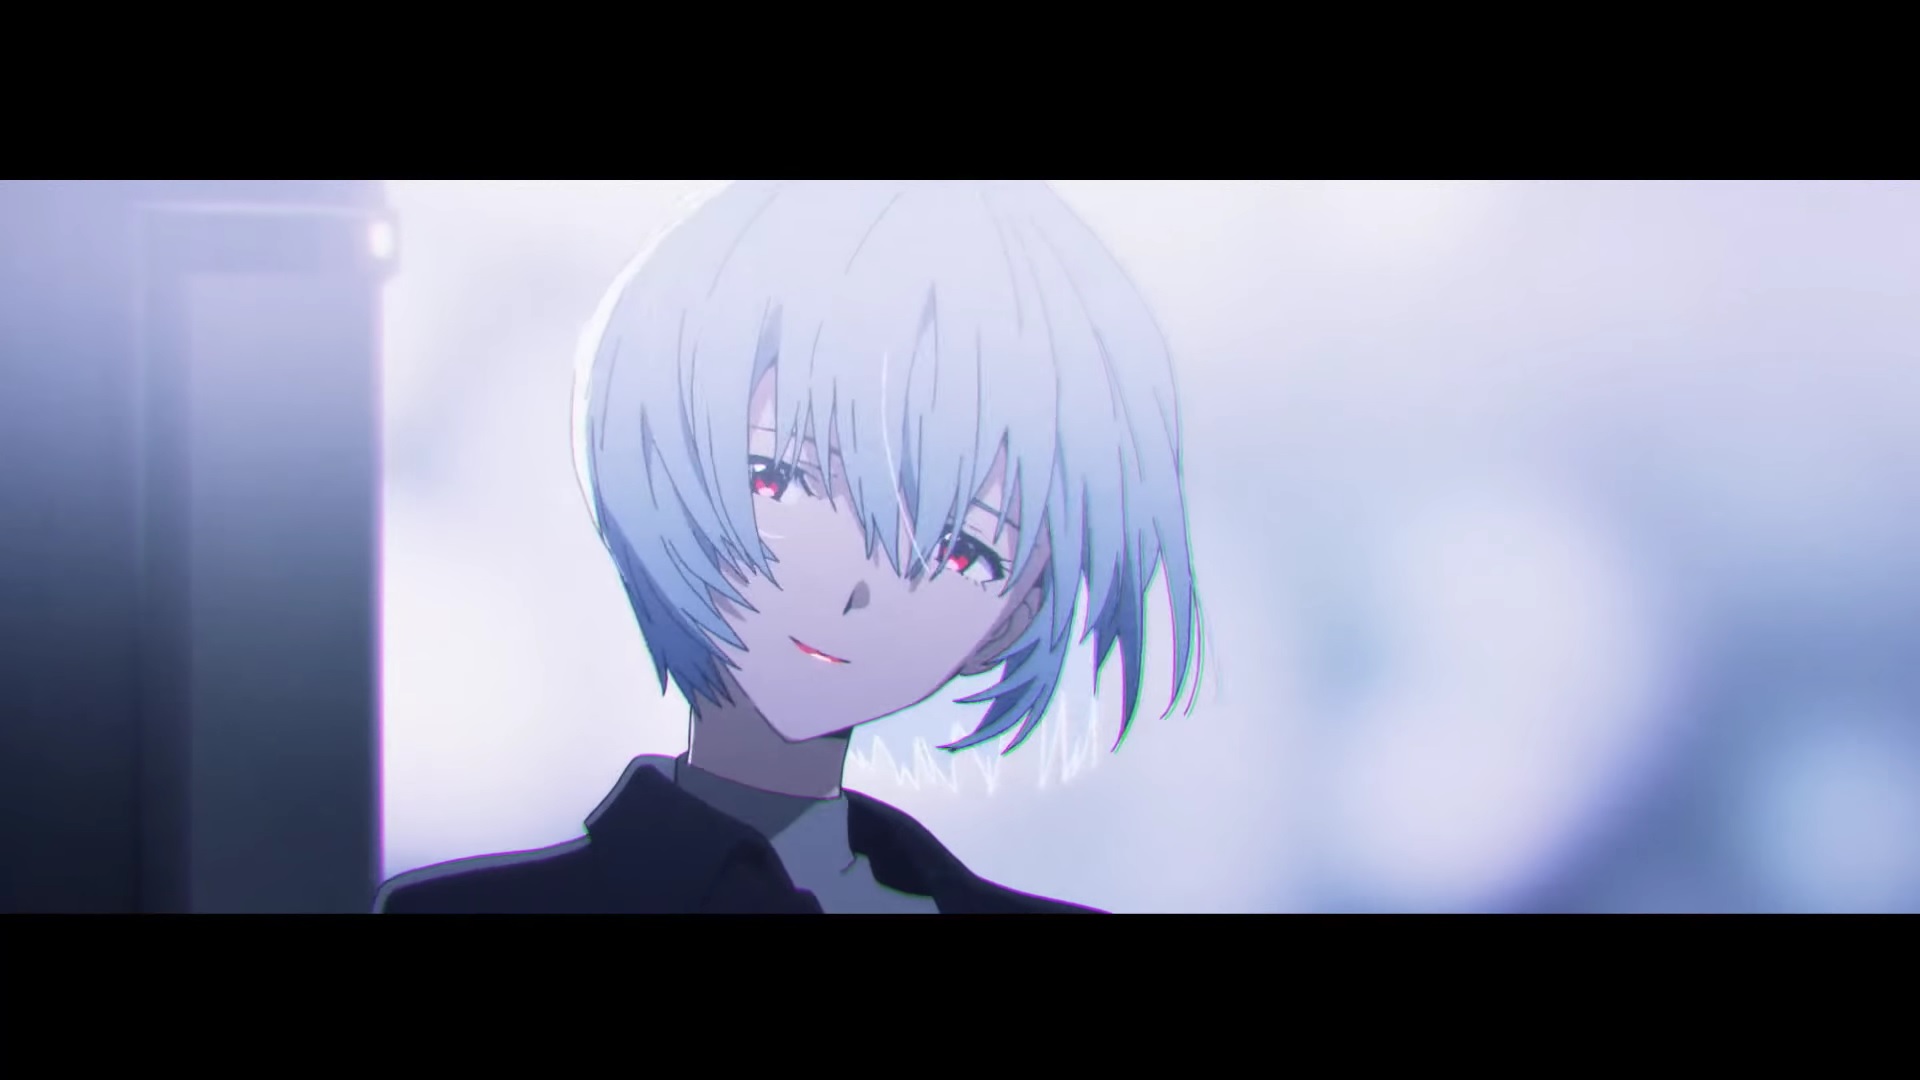 The Kate Tokyo Evangelion Rei Makeup Ad Has an Extended Cut